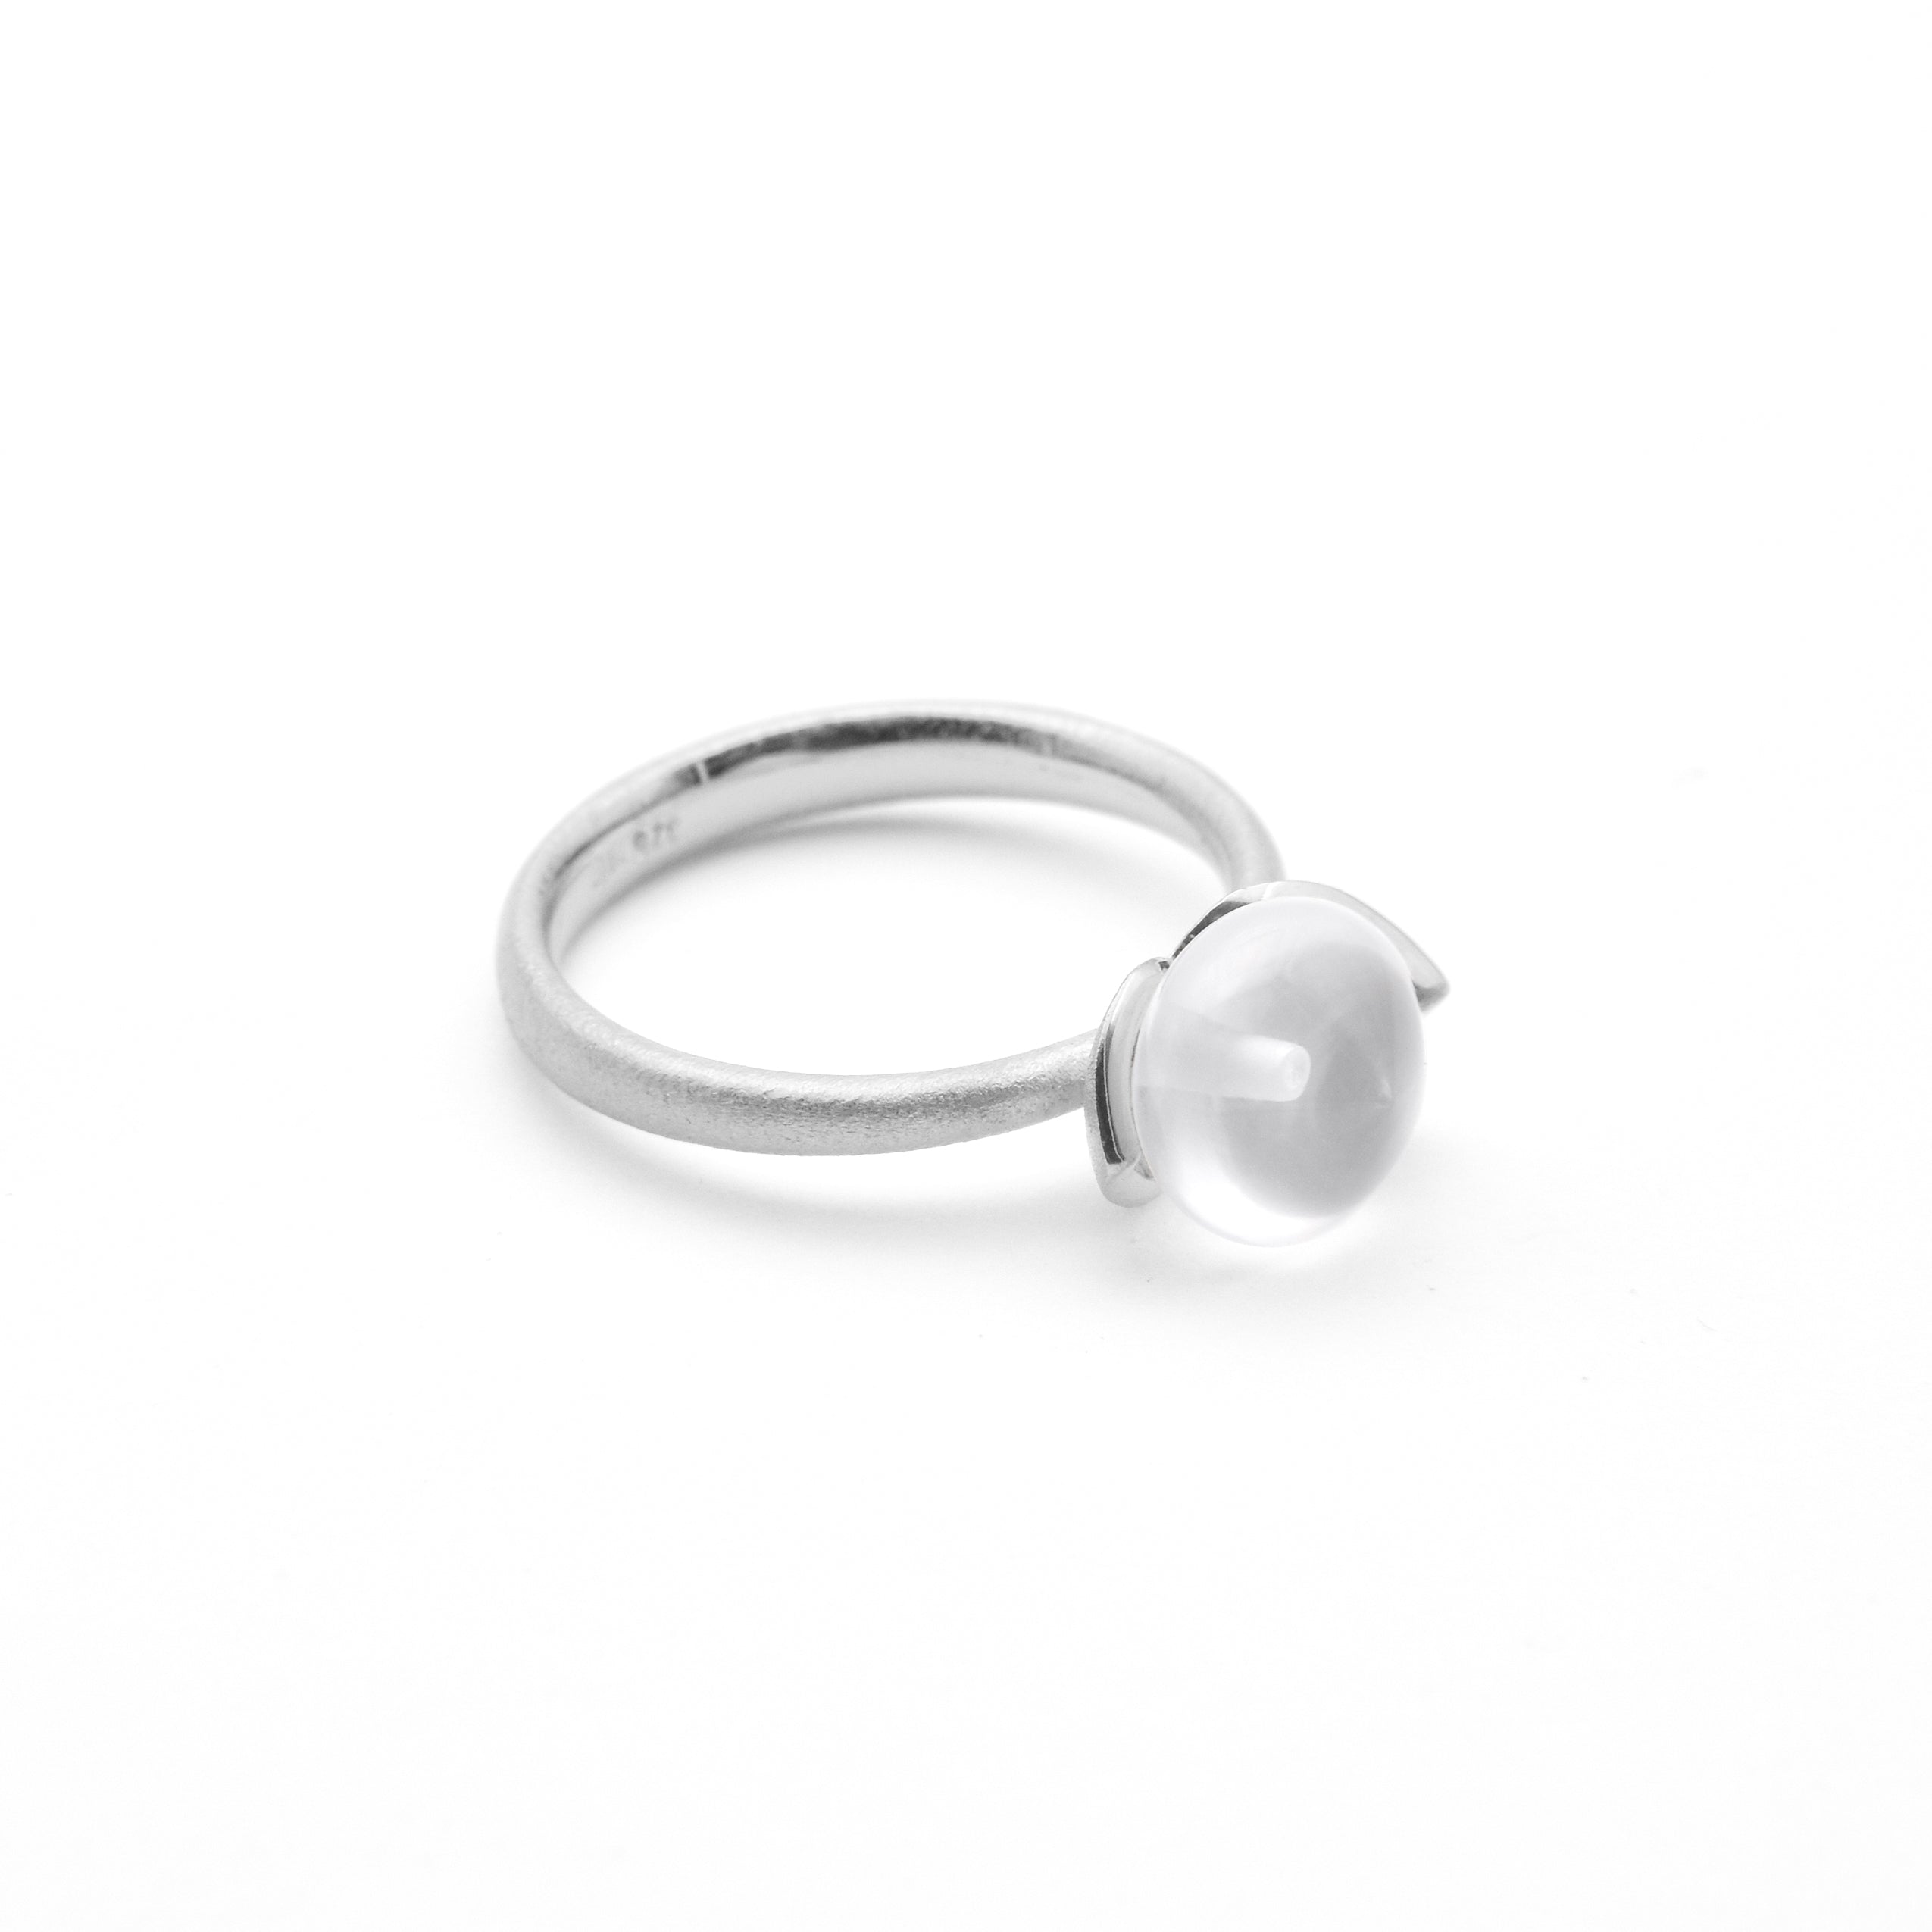 Dolce ring "smal" with milky quartz 925/-